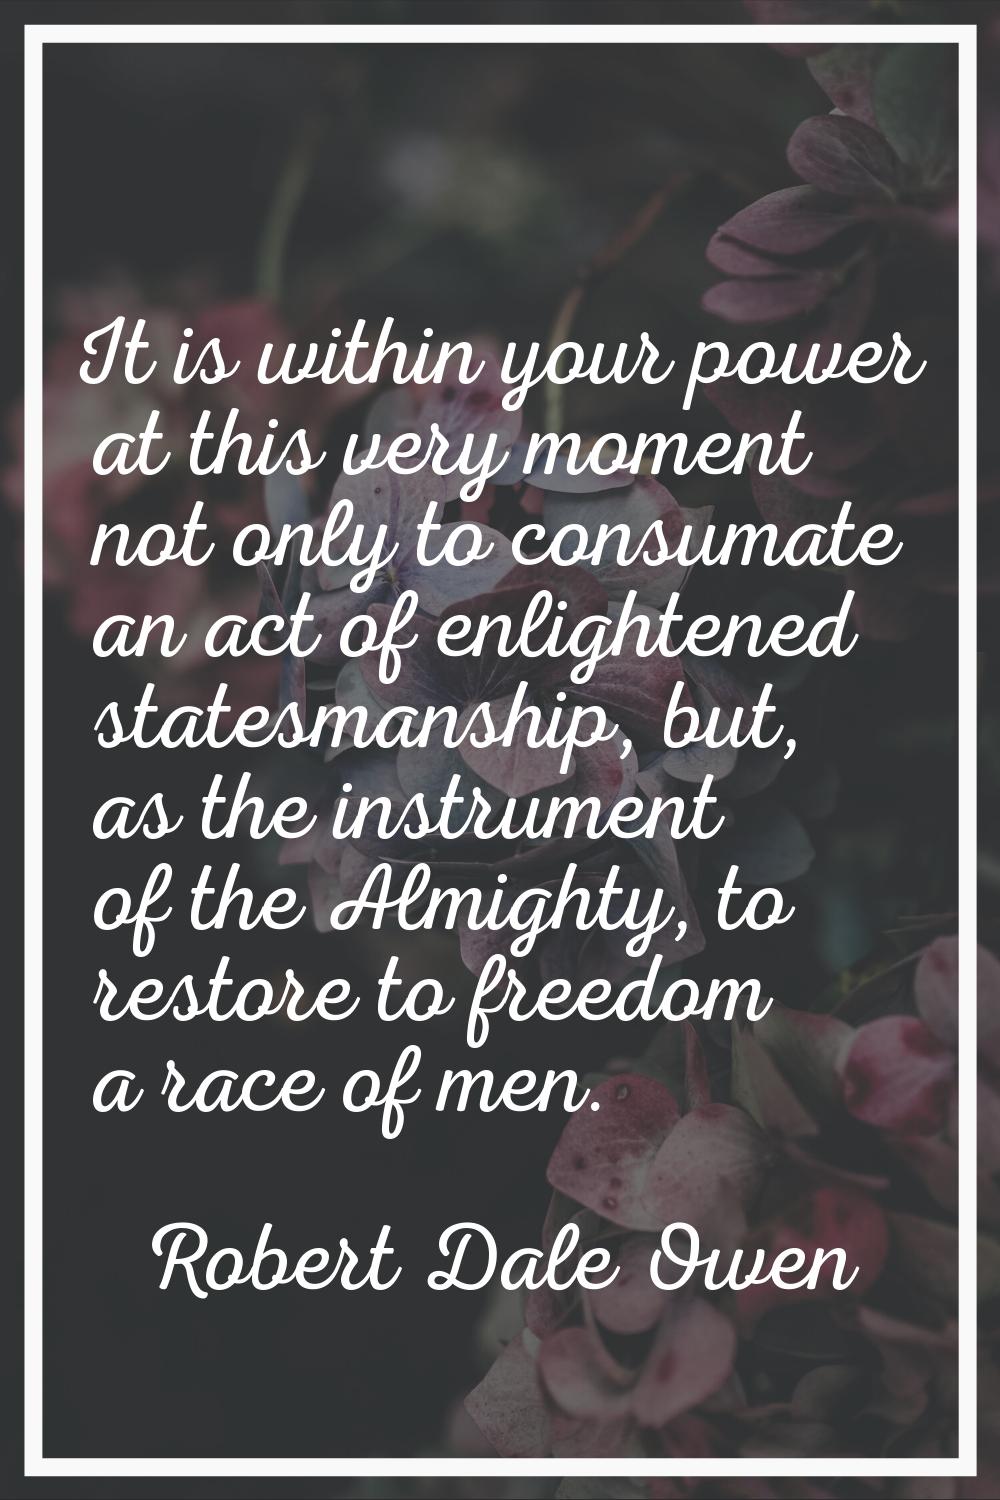 It is within your power at this very moment not only to consumate an act of enlightened statesmansh